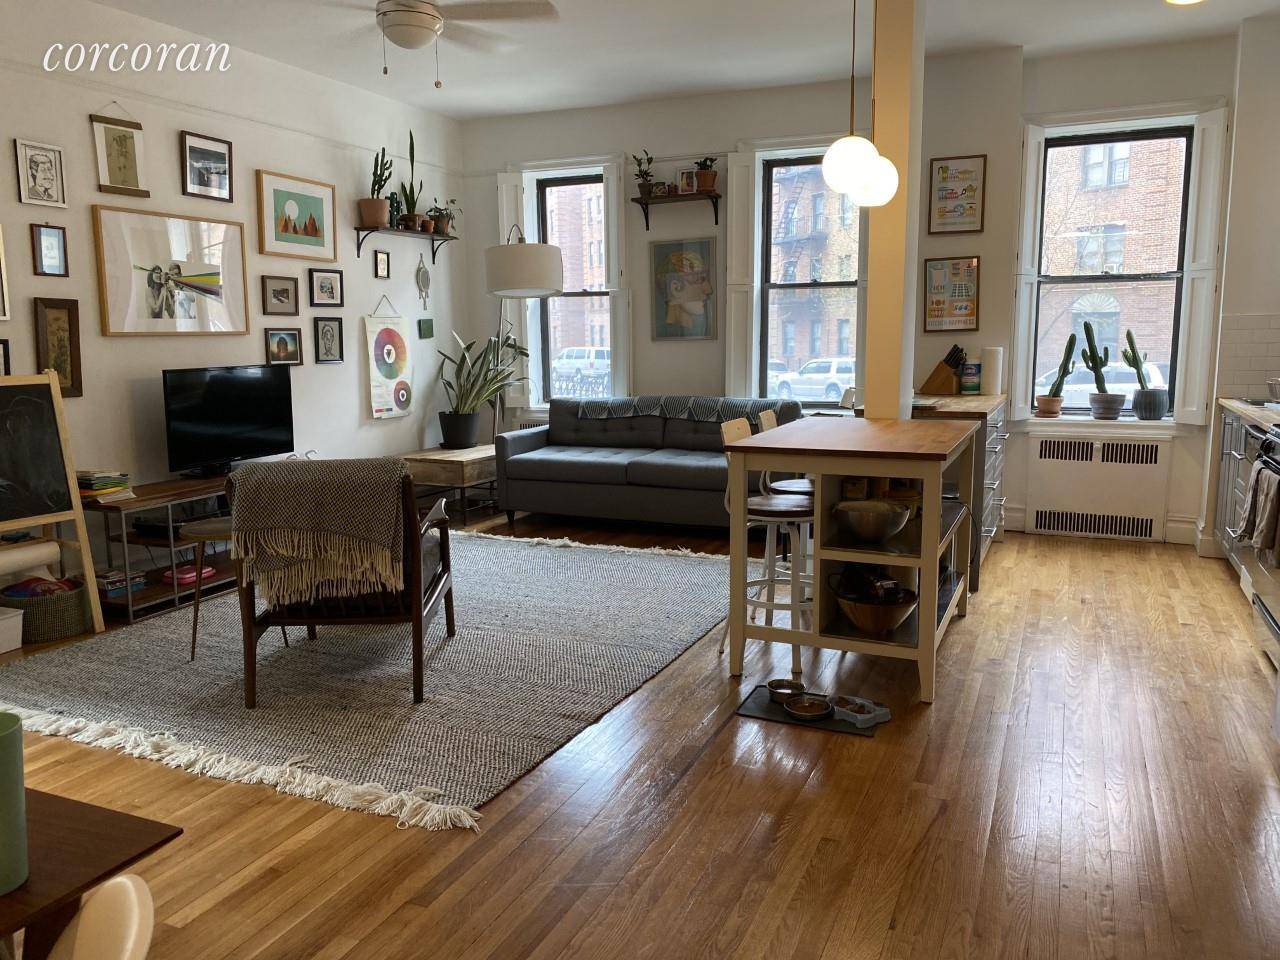 Boasting approximately 1100 square feet of usable space, excellent Southern exposure sunlight, 10 foot ceilings and stunning hardwood floors, this immaculately renovated Jr 2 bedroom is one of the best ...